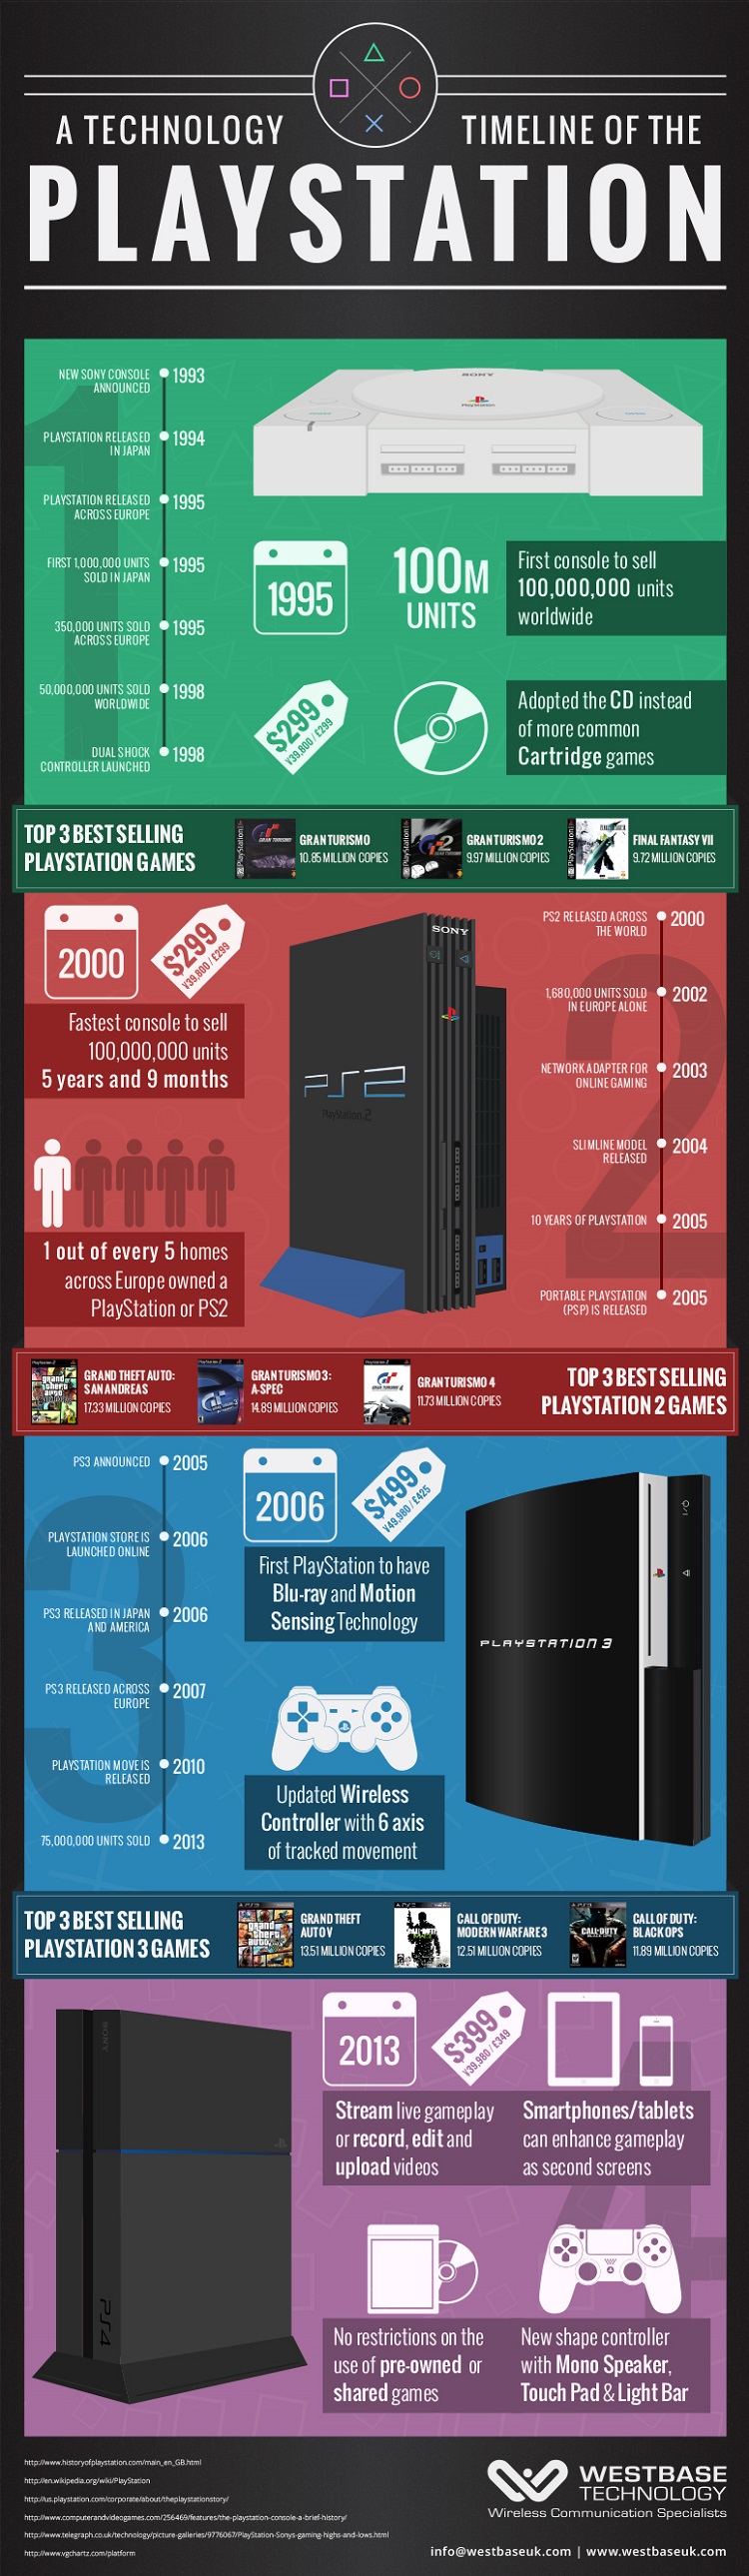 antyder momentum Disco Infographic: A timeline of Sony's PlayStation franchise | TechSpot